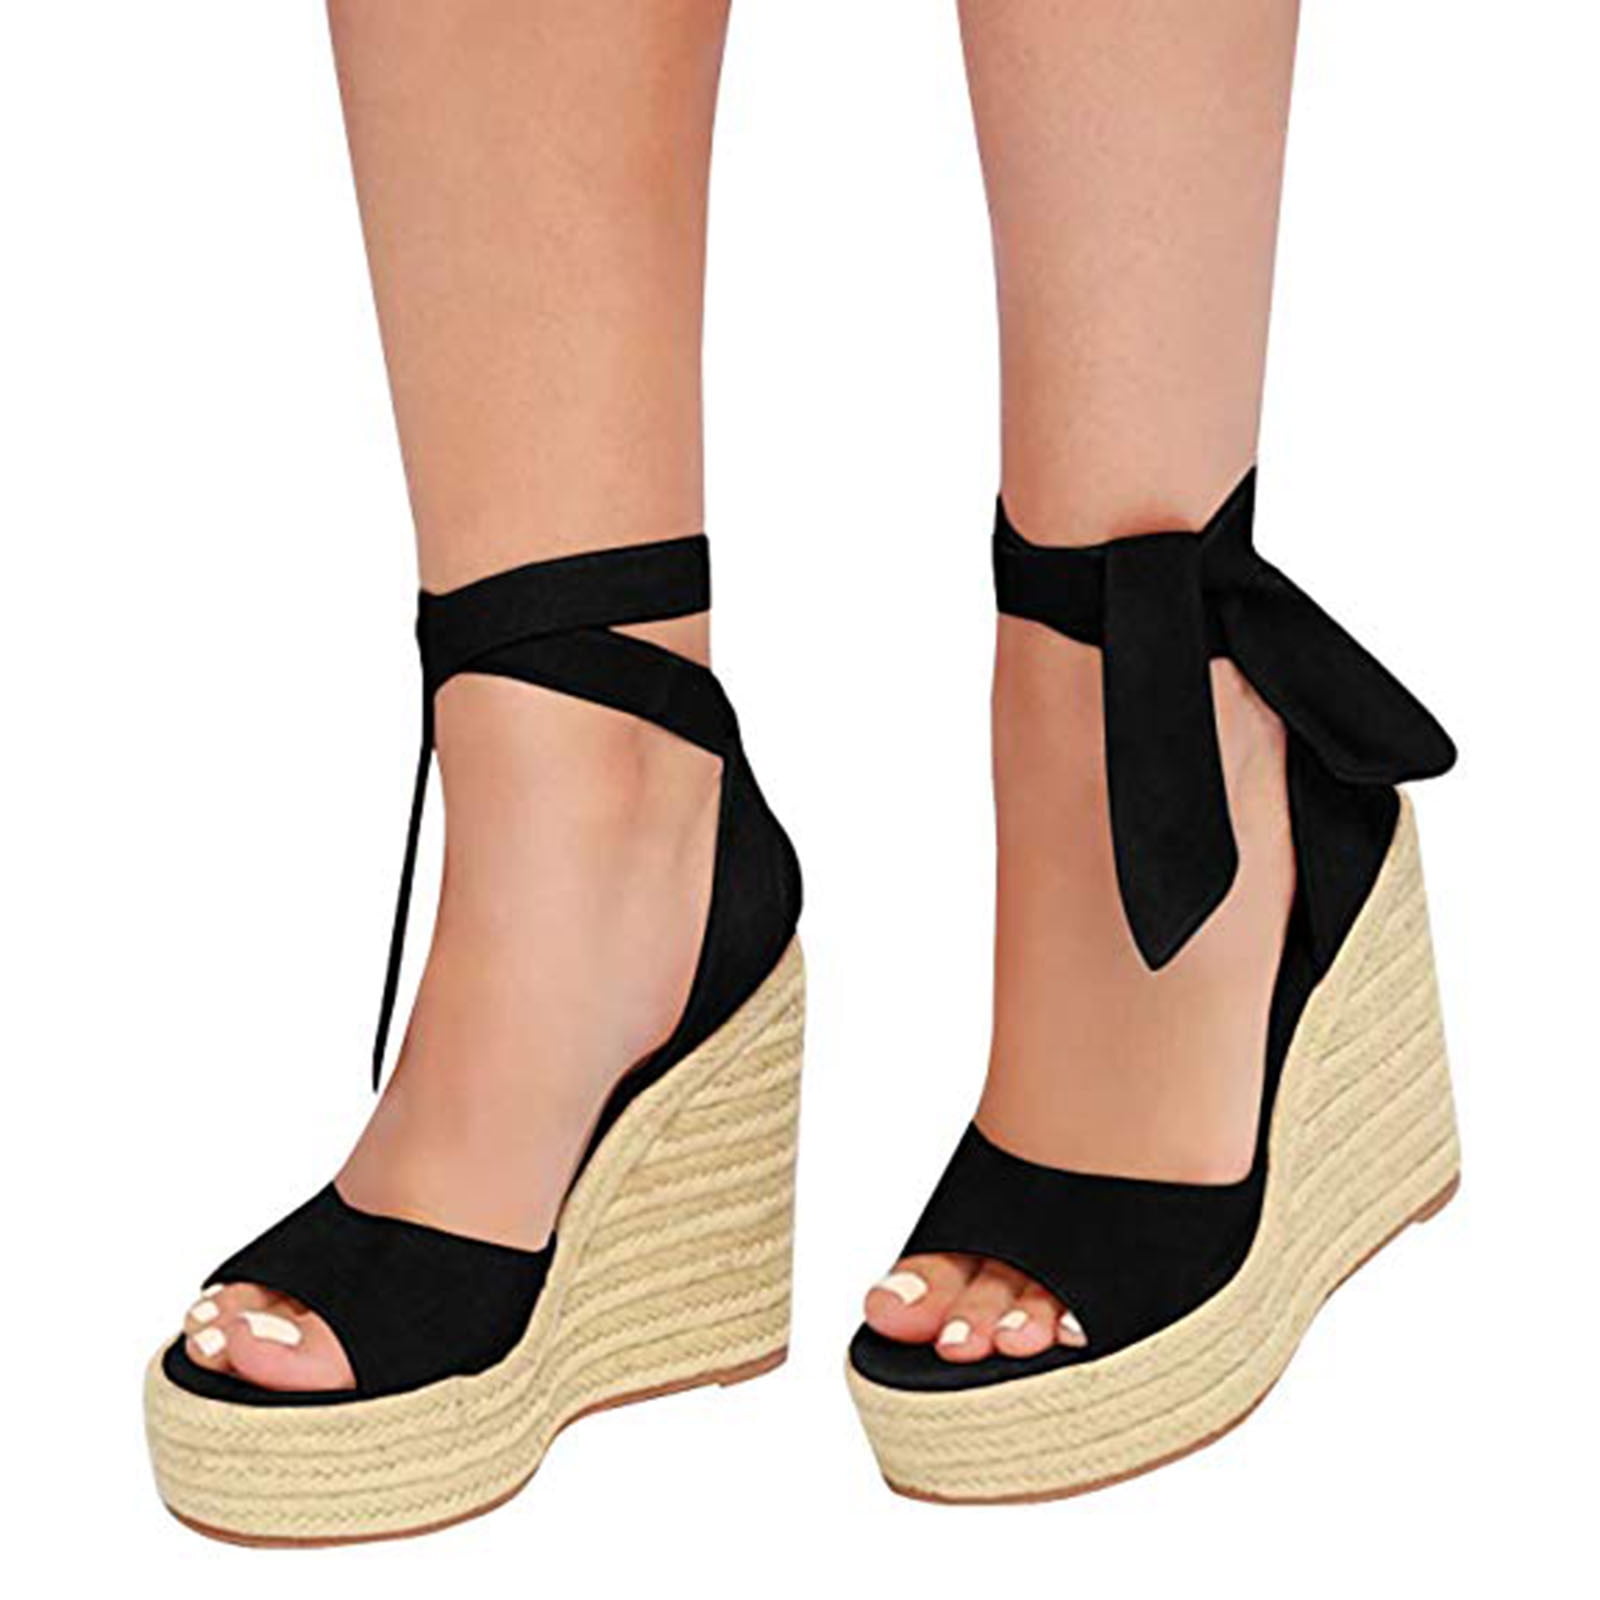 Black Gladiator Heels Strappy Over-the-knee Stiletto Heels Sandals|FSJshoes